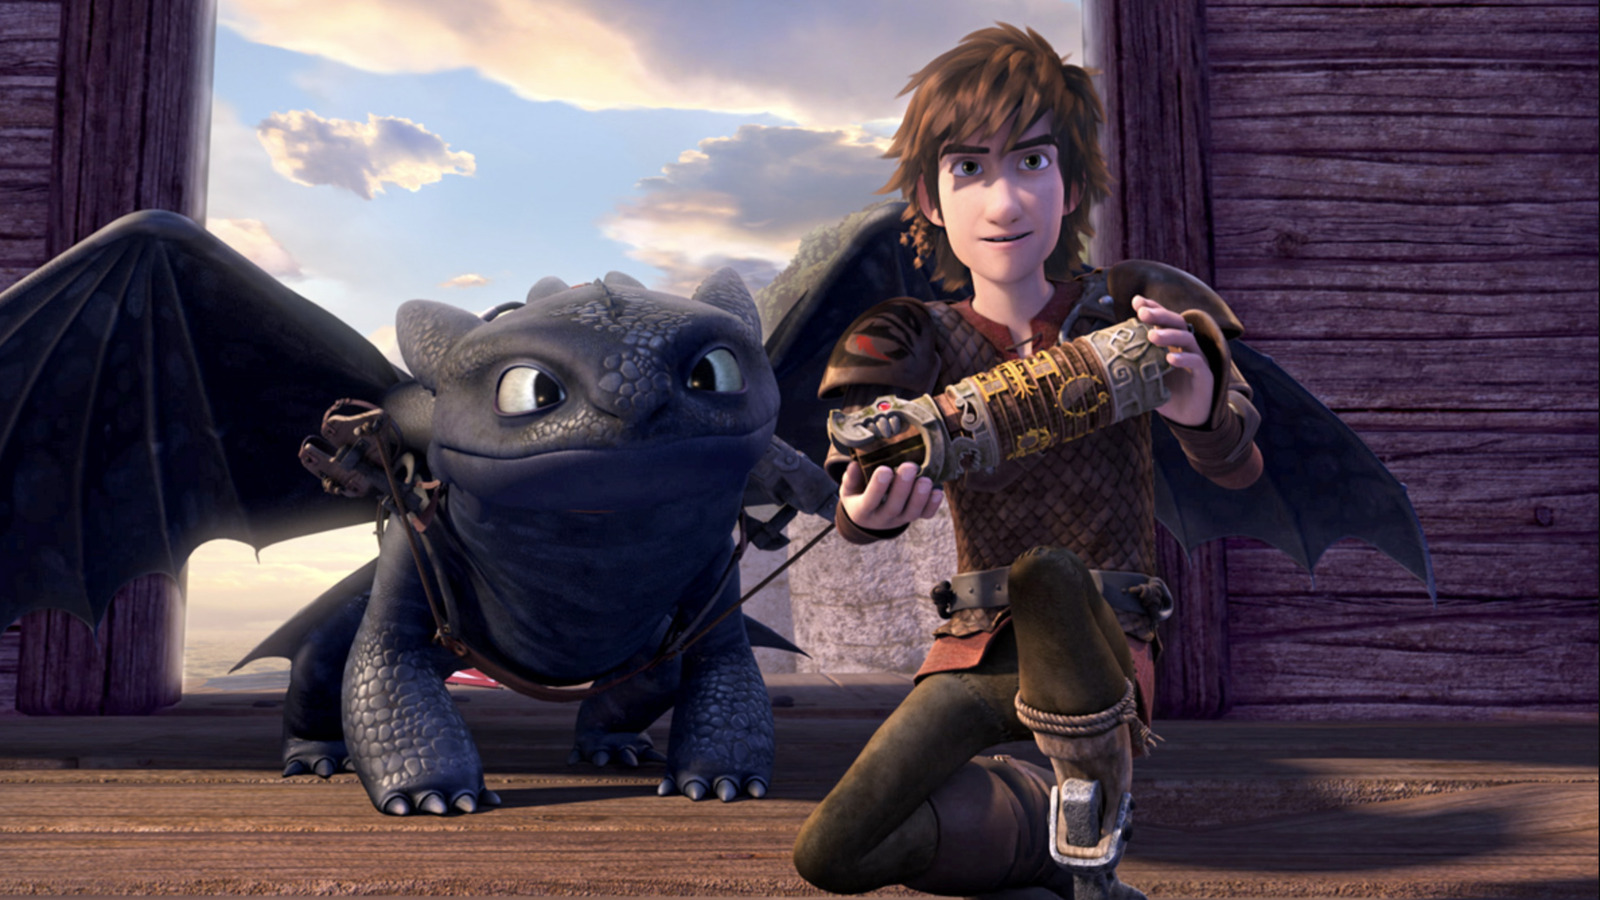 How to Train Your Dragon' Live-Action Movie in the Works for 2025